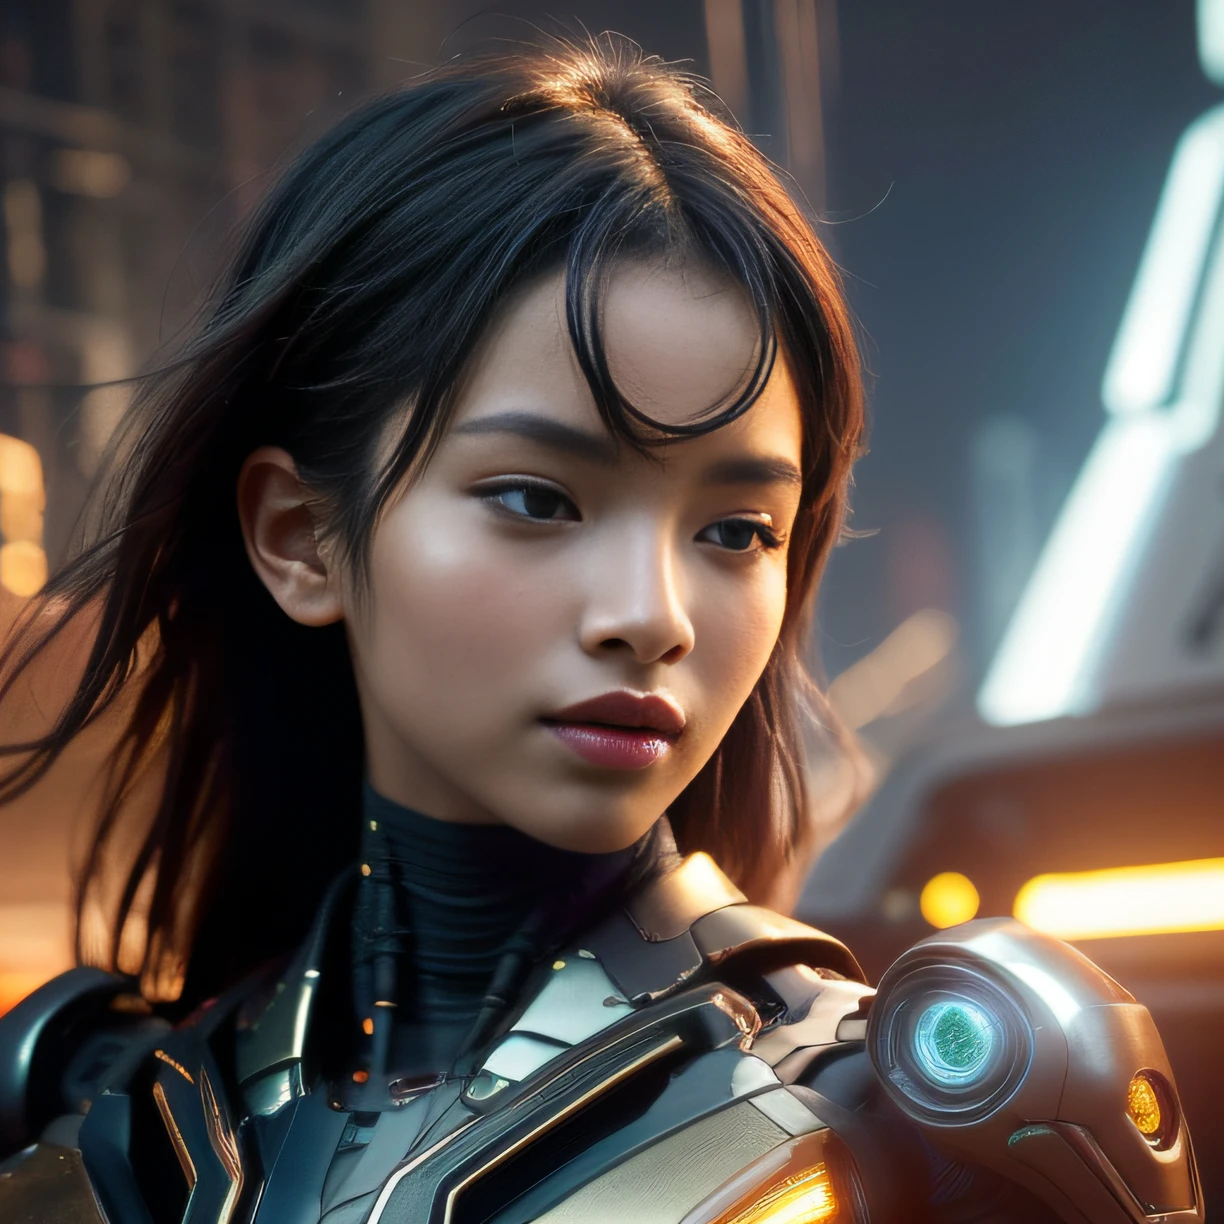 hot slave, close up, masterpiece , beautiful woman, perfect skin, metallic details, futuristic, glowing lights, highres, cyberpunk style, vibrant colors, advanced technology, sharp focus, spaceship background, confident expression, complex machinery, detailed wiring, robotic enhancements, Dazzling, Luminous, Gleaming, Brilliant, neon, Graceful, Ravishing, Passionate